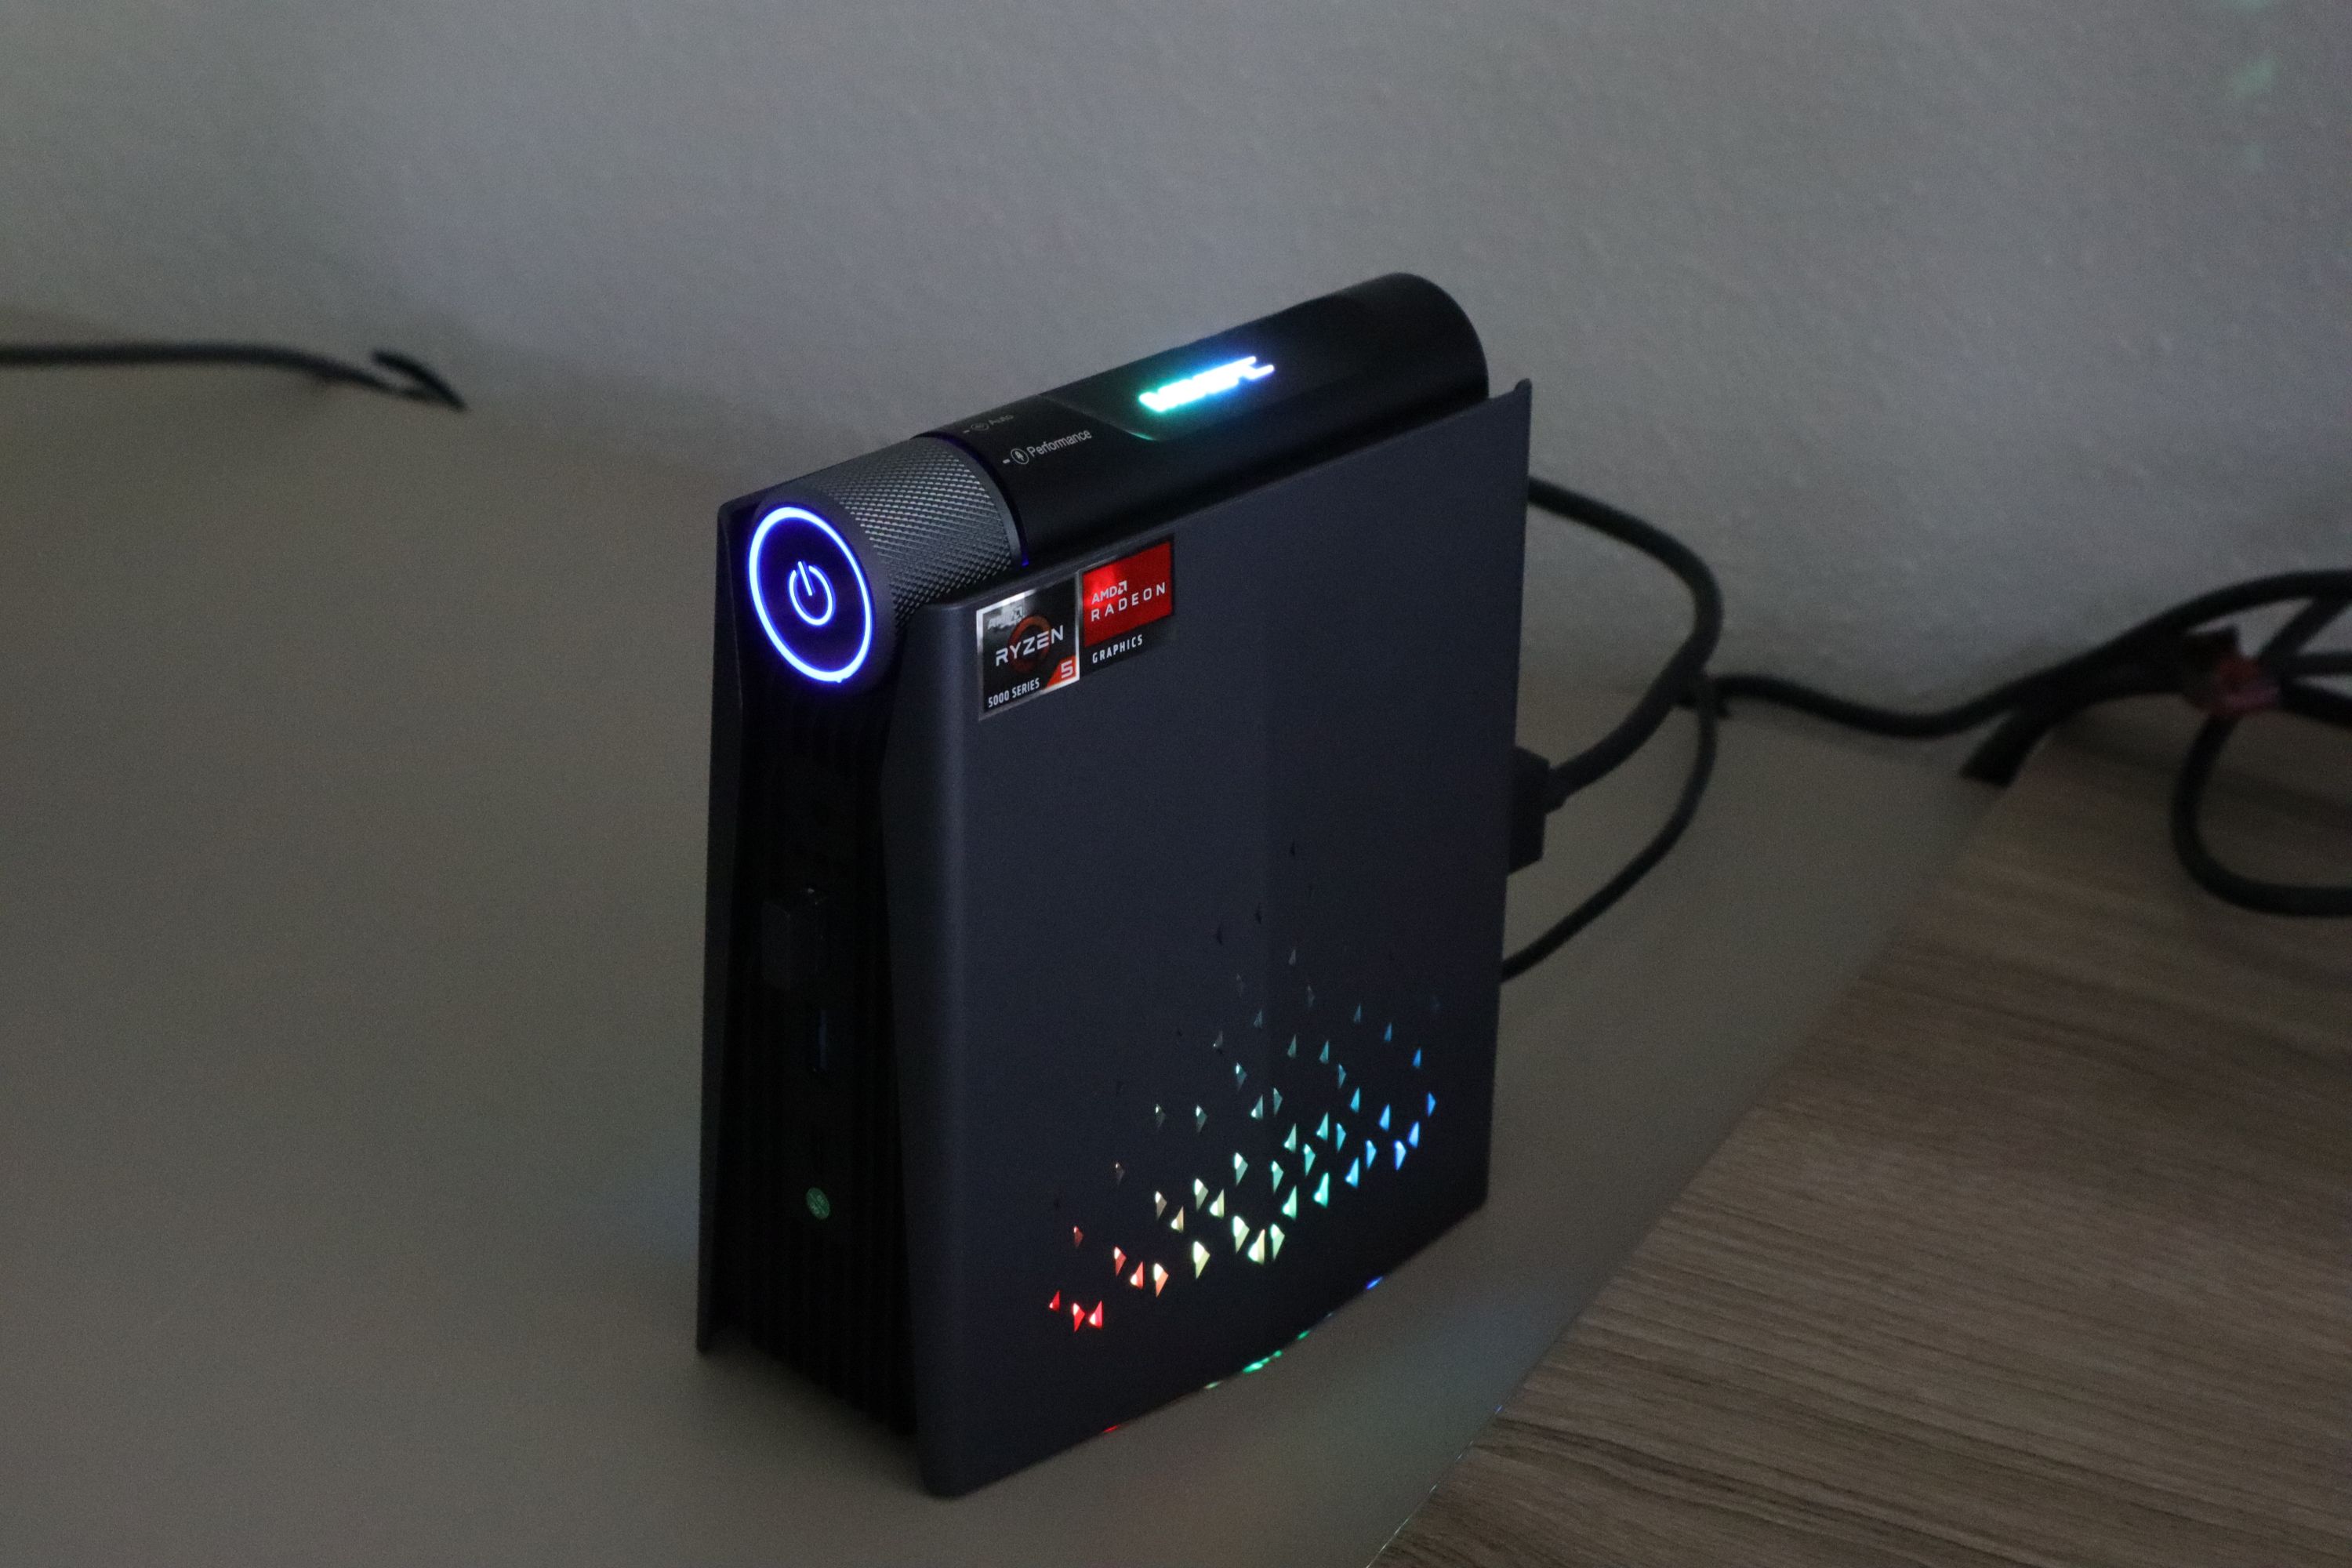 ACEMAGICIAN AMR5 Mini-PC with AMD Ryzen 5 5600U tested